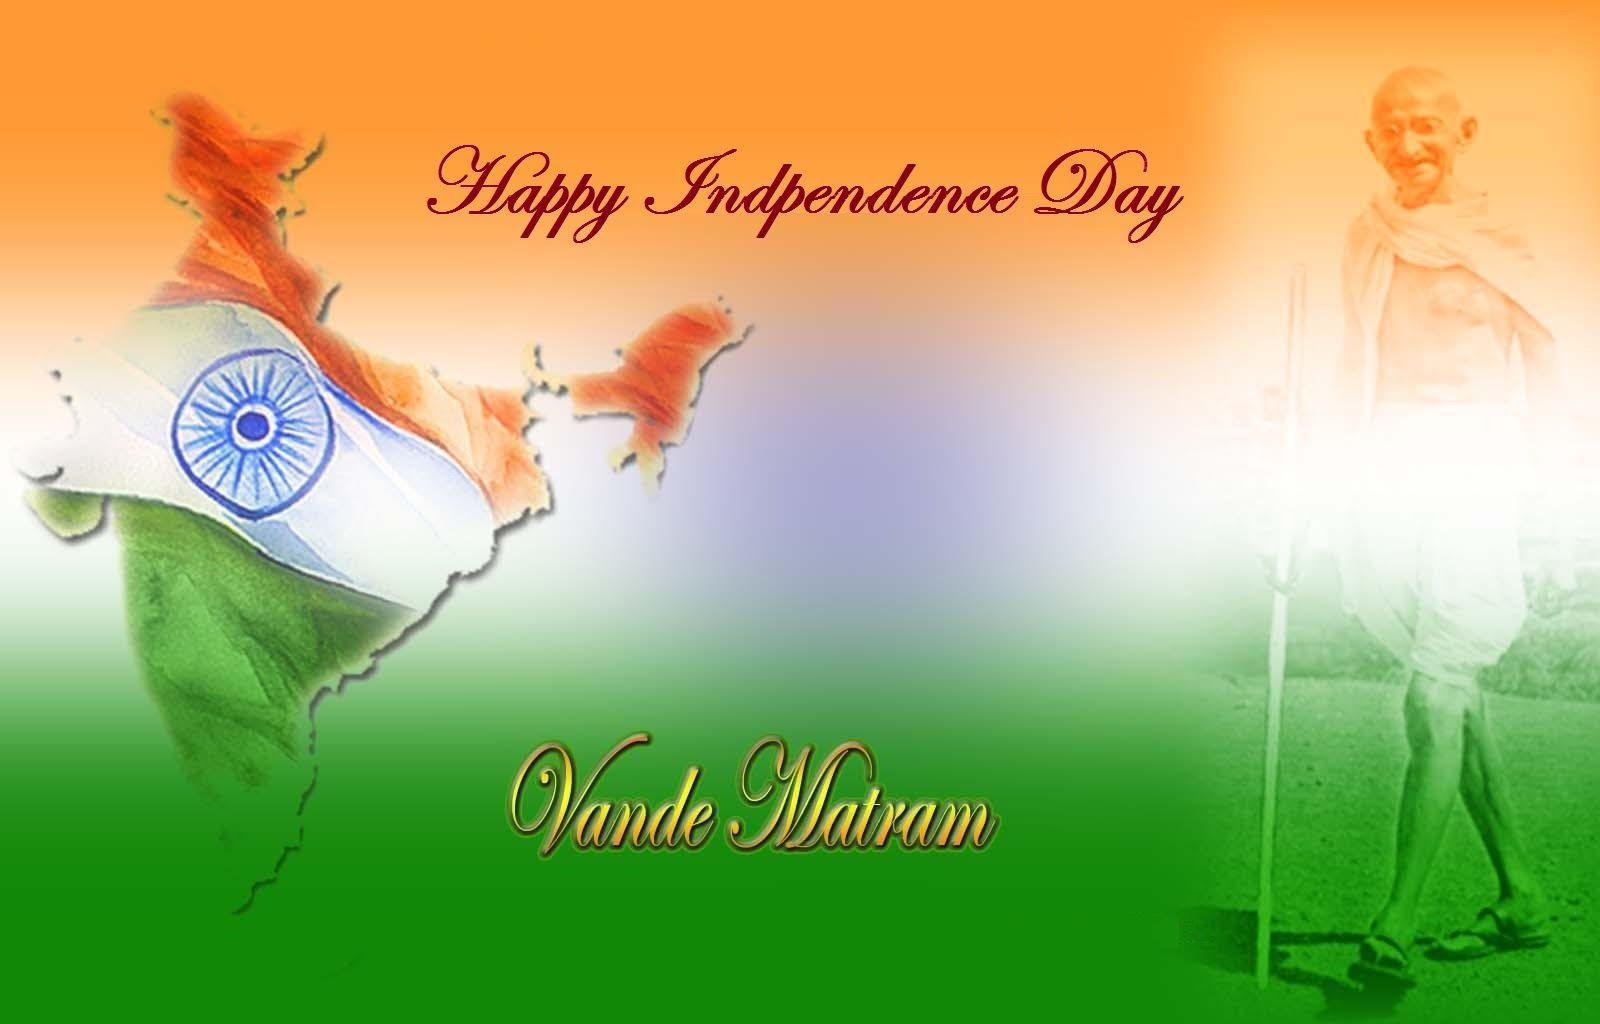 70th Independence Day India Essay Speech Quotes Wishes Image Slogans